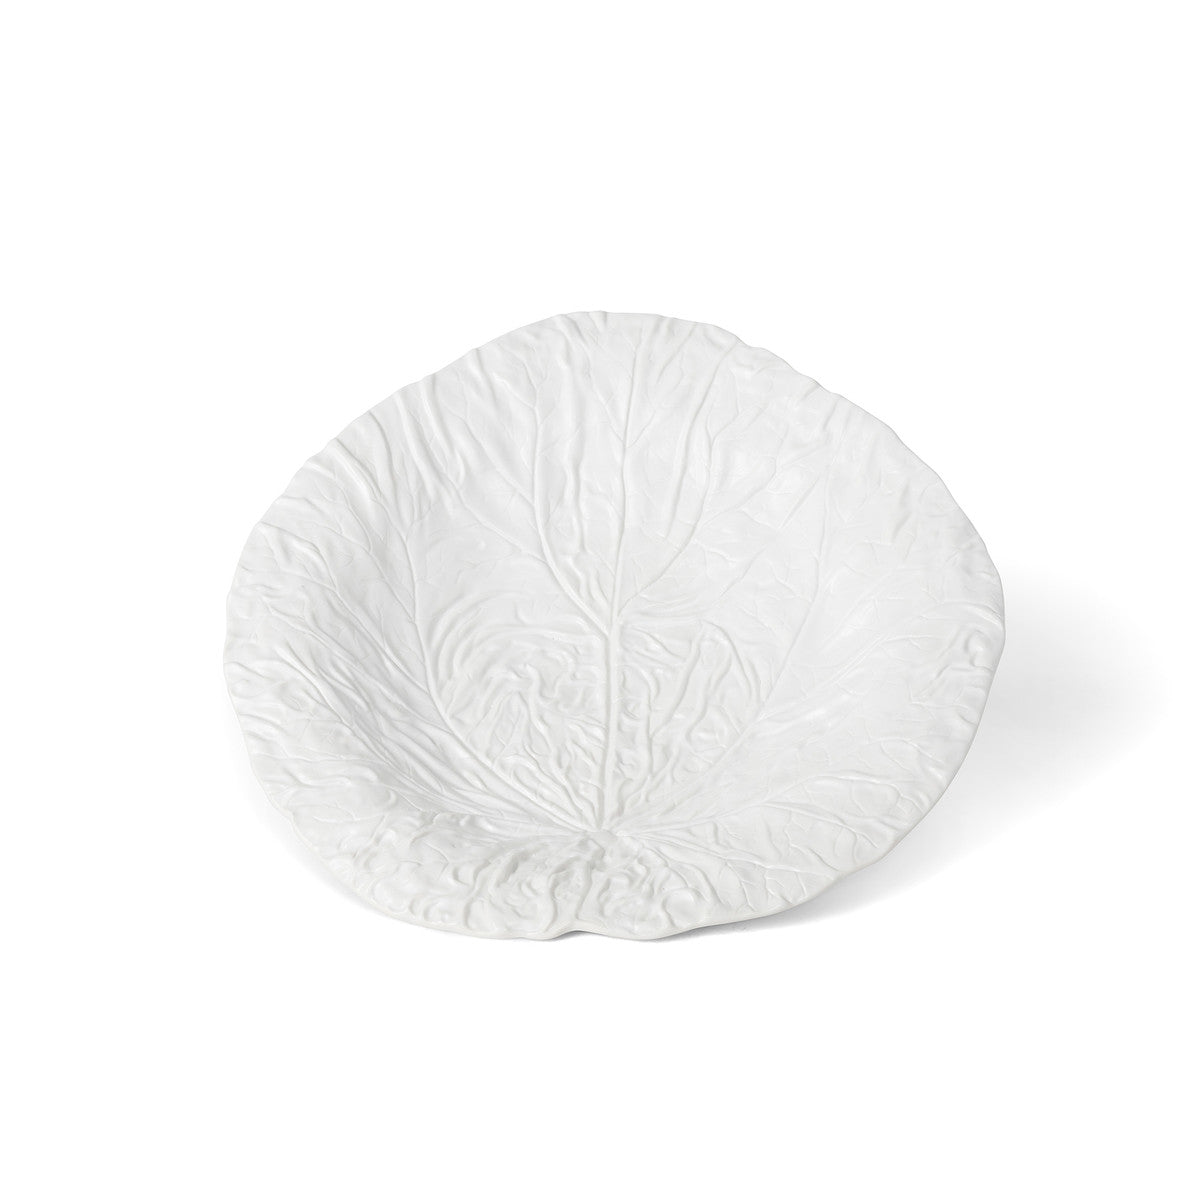 White Cabbage Leaf Ceramic Charger - 14" Dia.